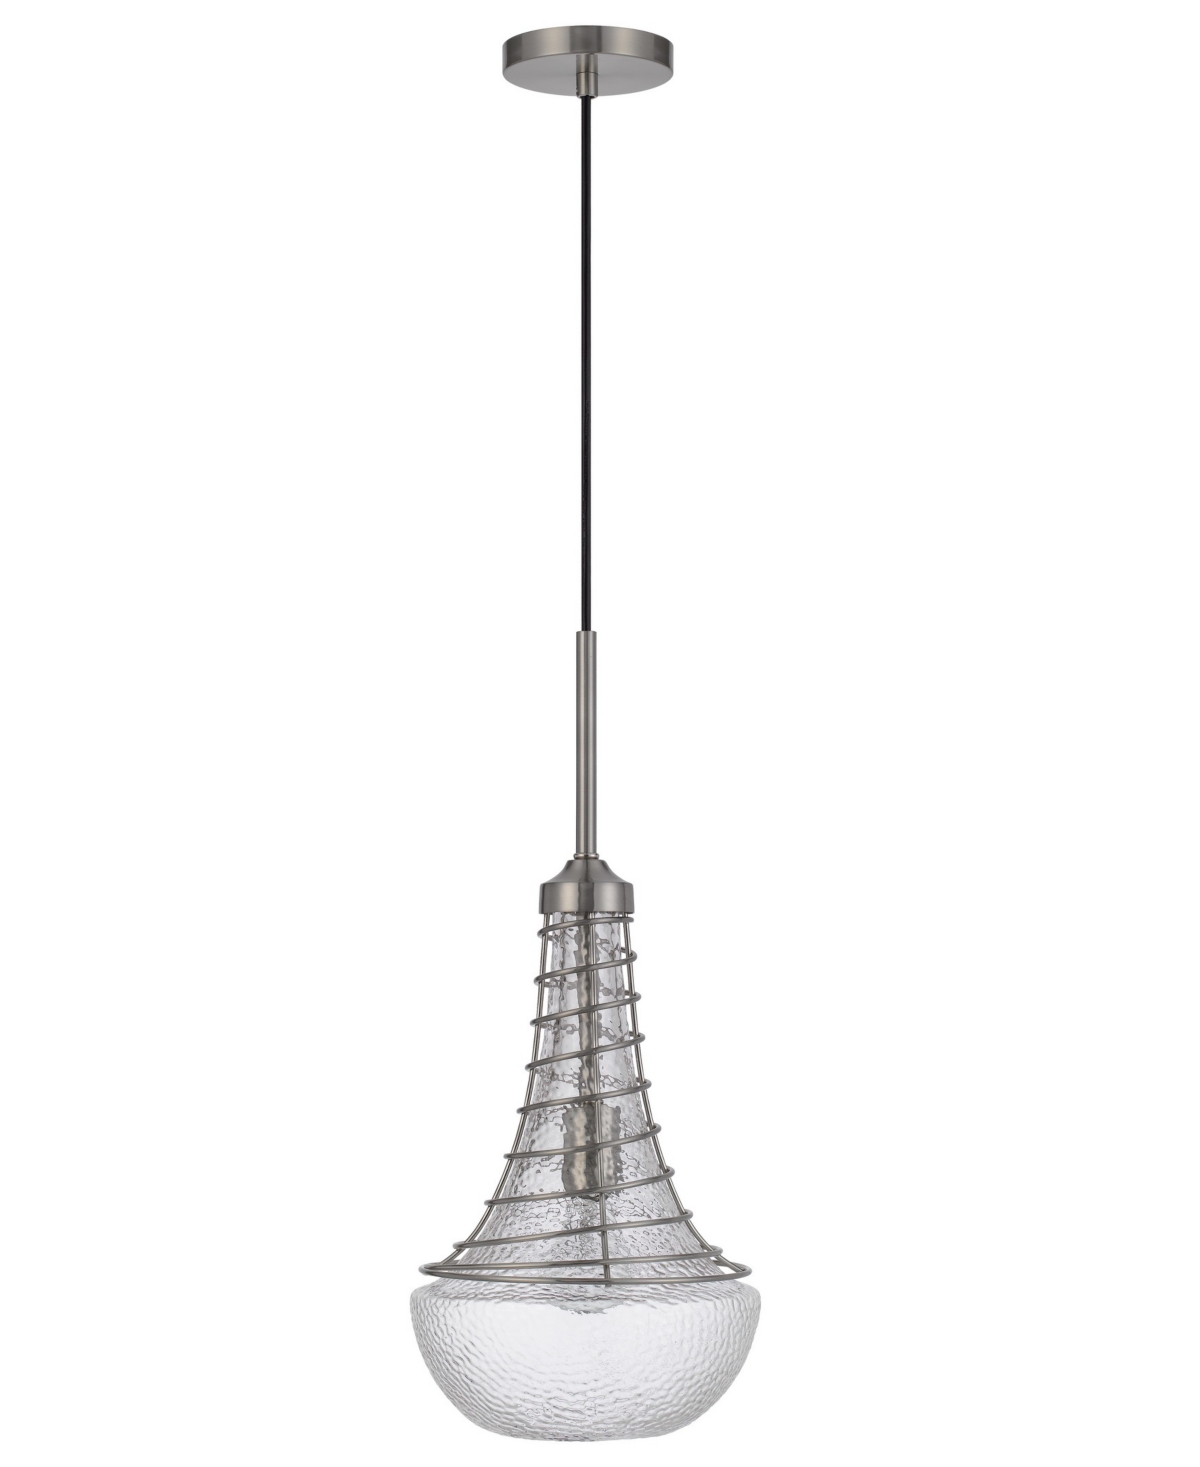 Cal Lighting Baraboo 21" Height Metal And Glass Pendant In Brushed Steel,silver